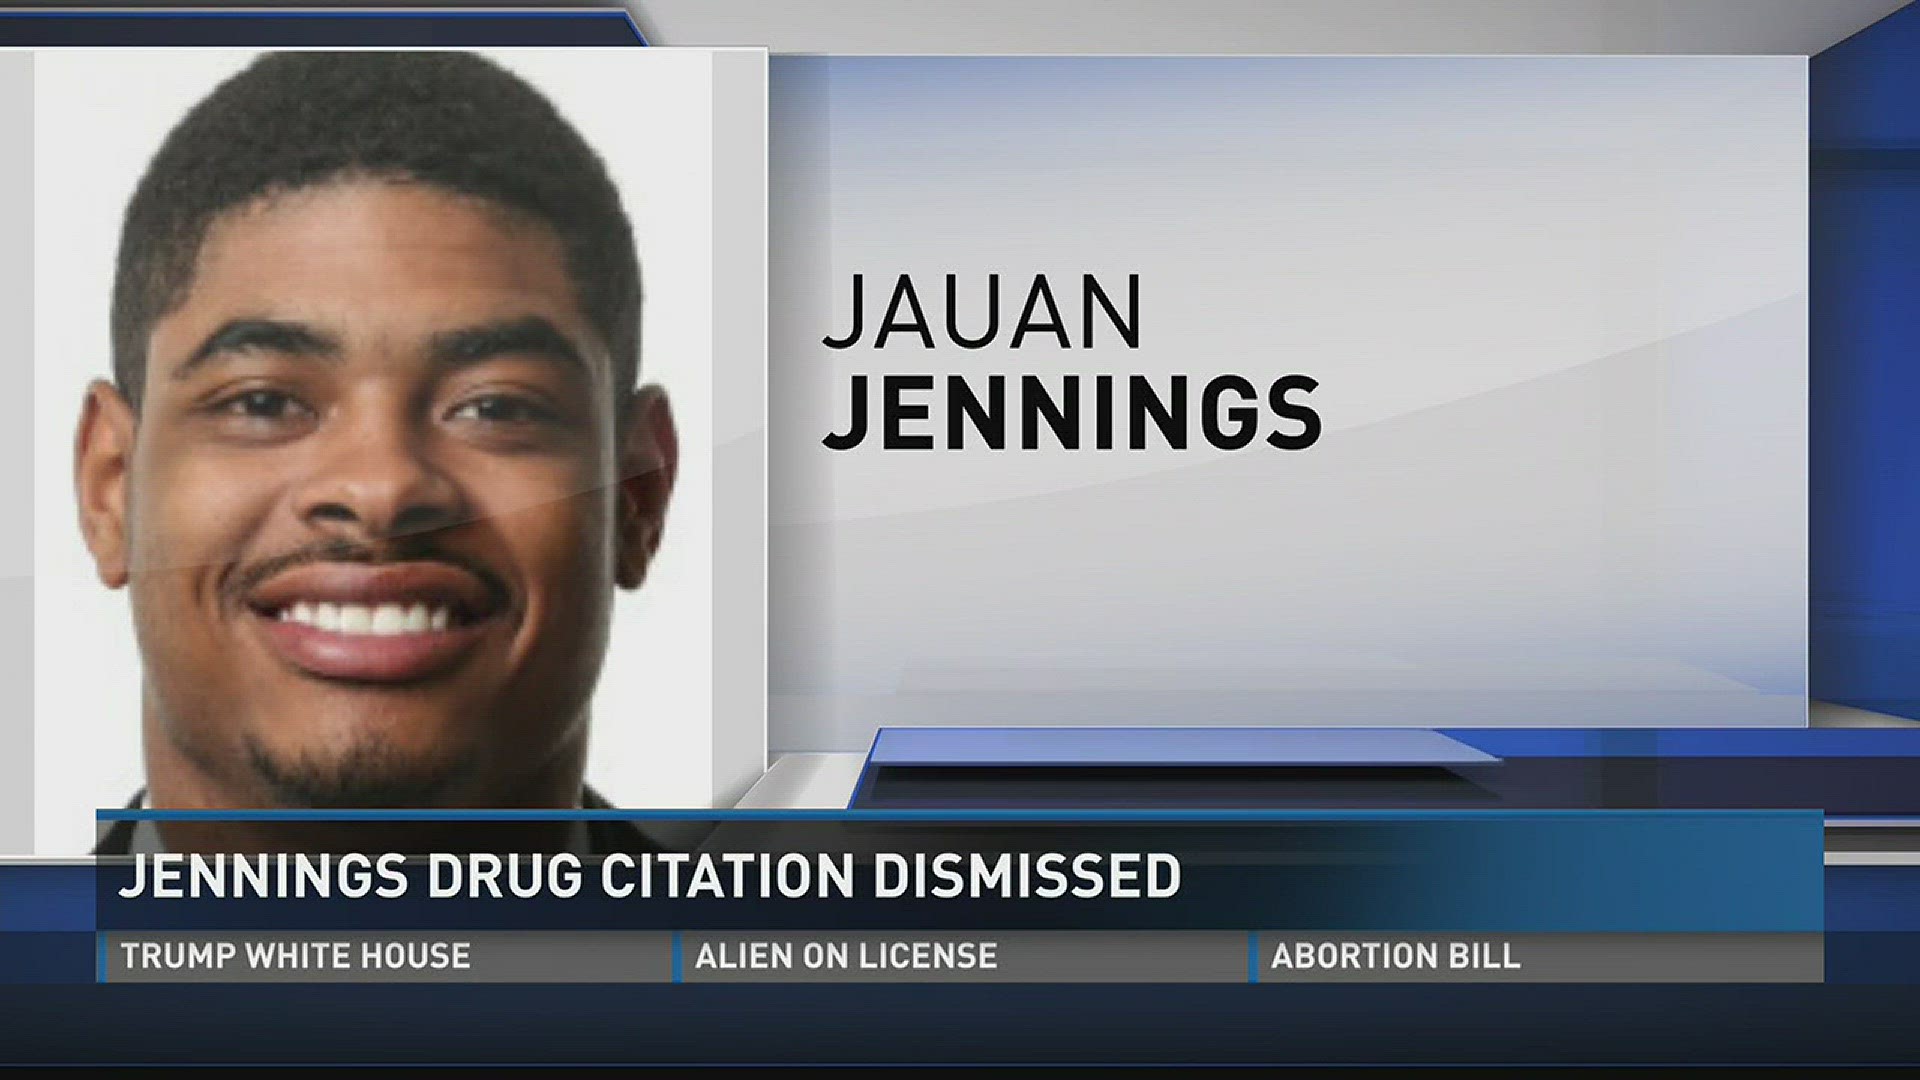 A drug possession citation against Tennessee football player Jauan Jennings has been dismissed after he paid court costs.